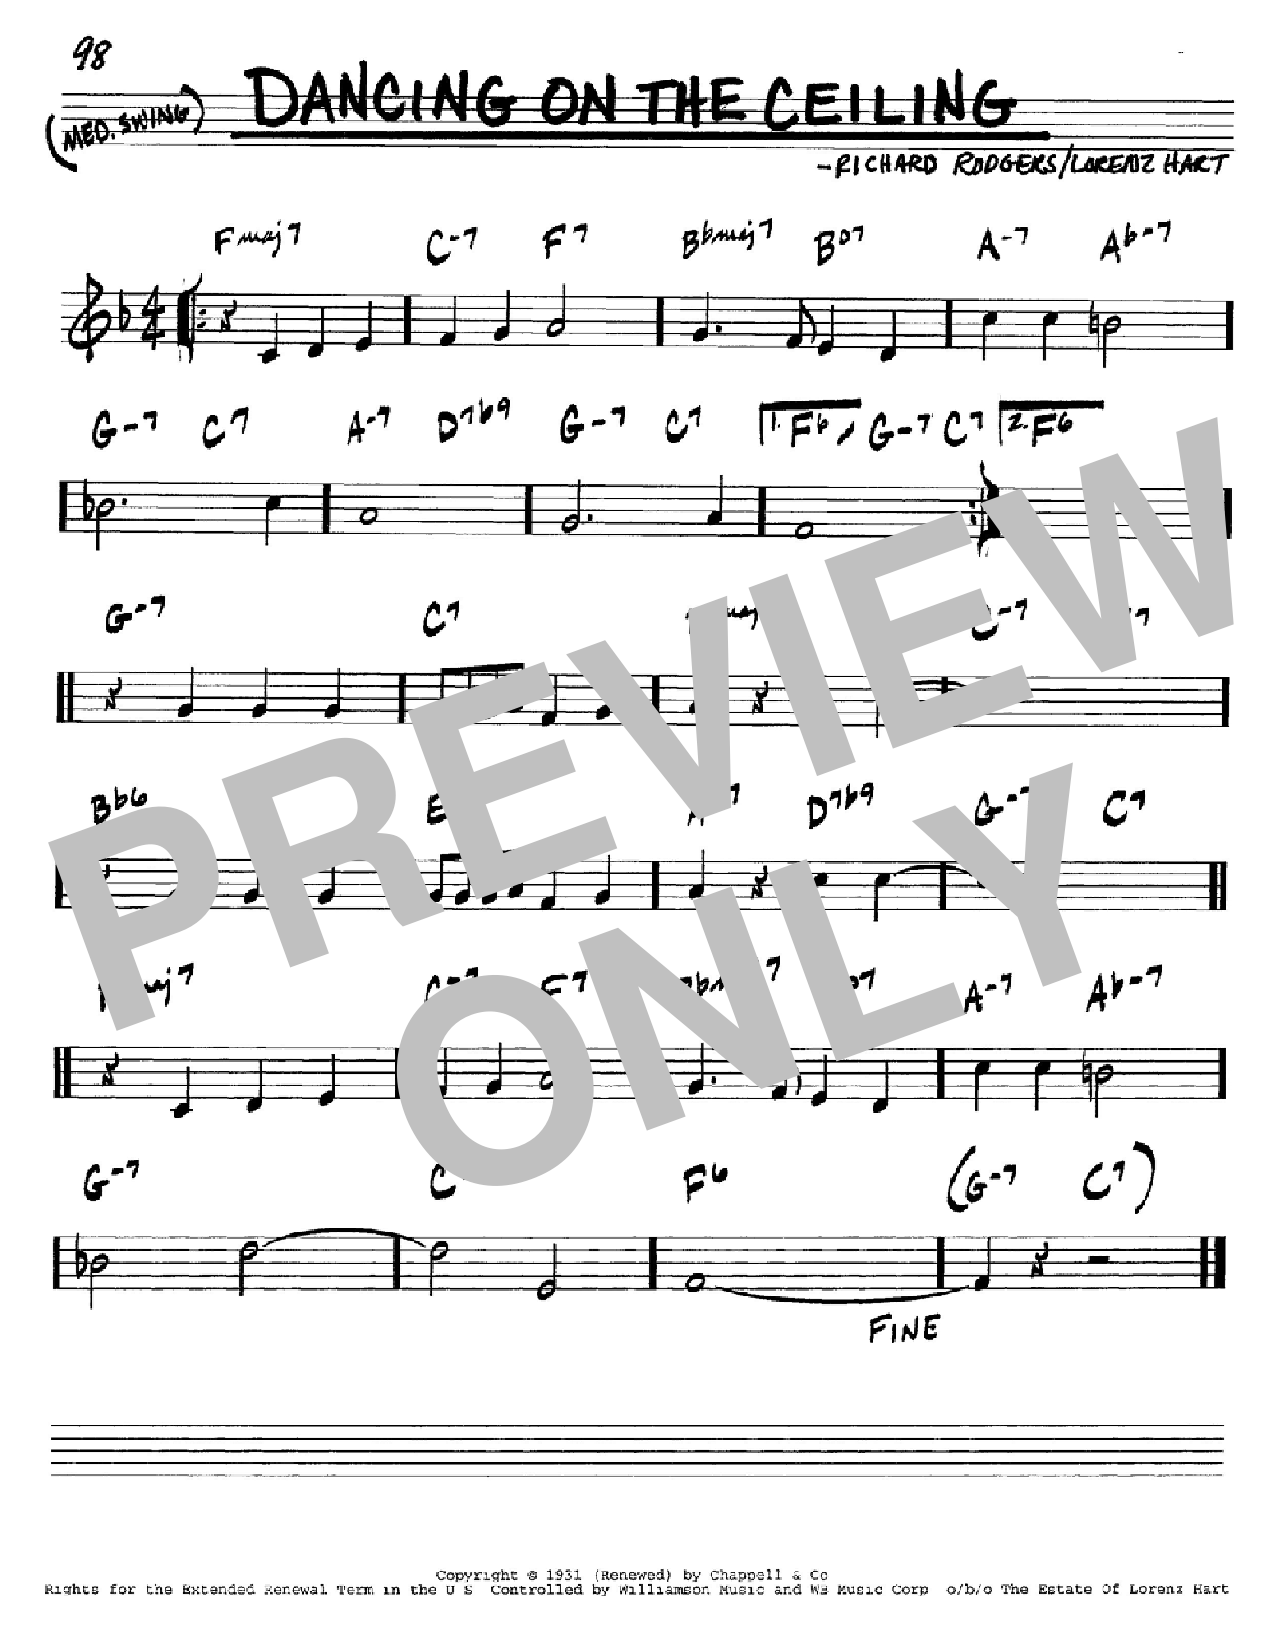 Download Rodgers & Hart Dancing On The Ceiling Sheet Music